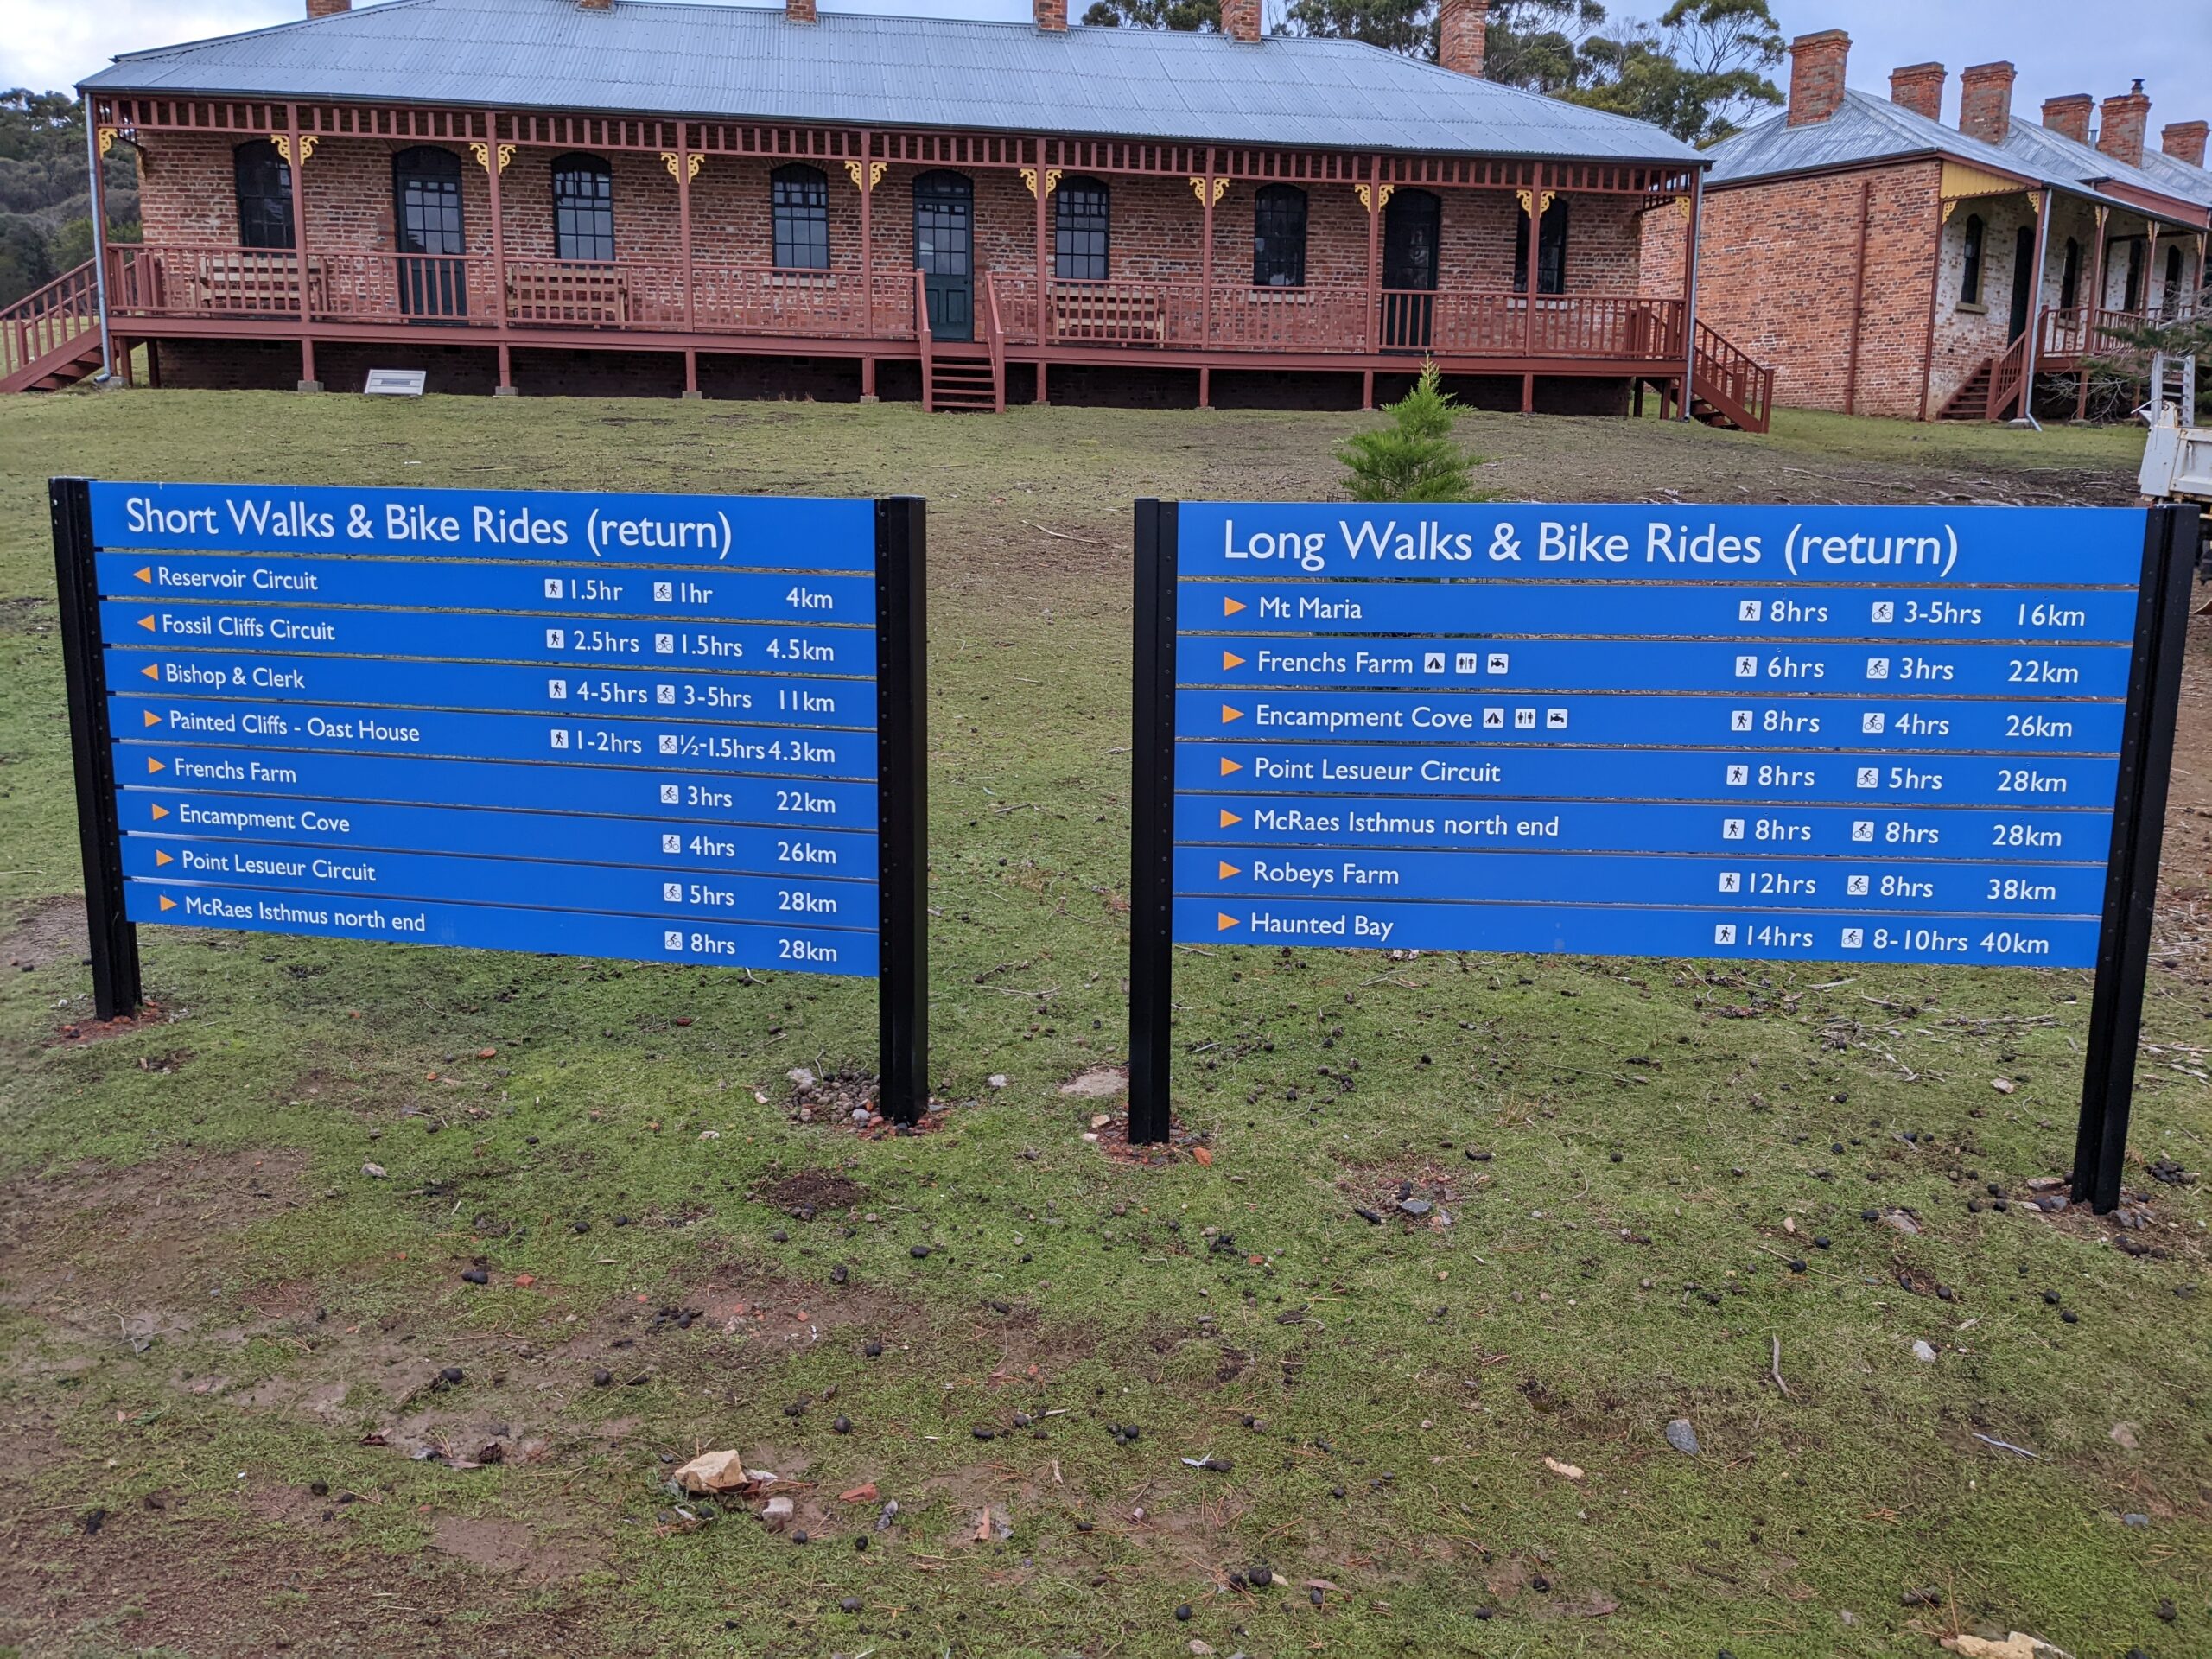 Signs pointing to various destinations on the island for bikes and walks.